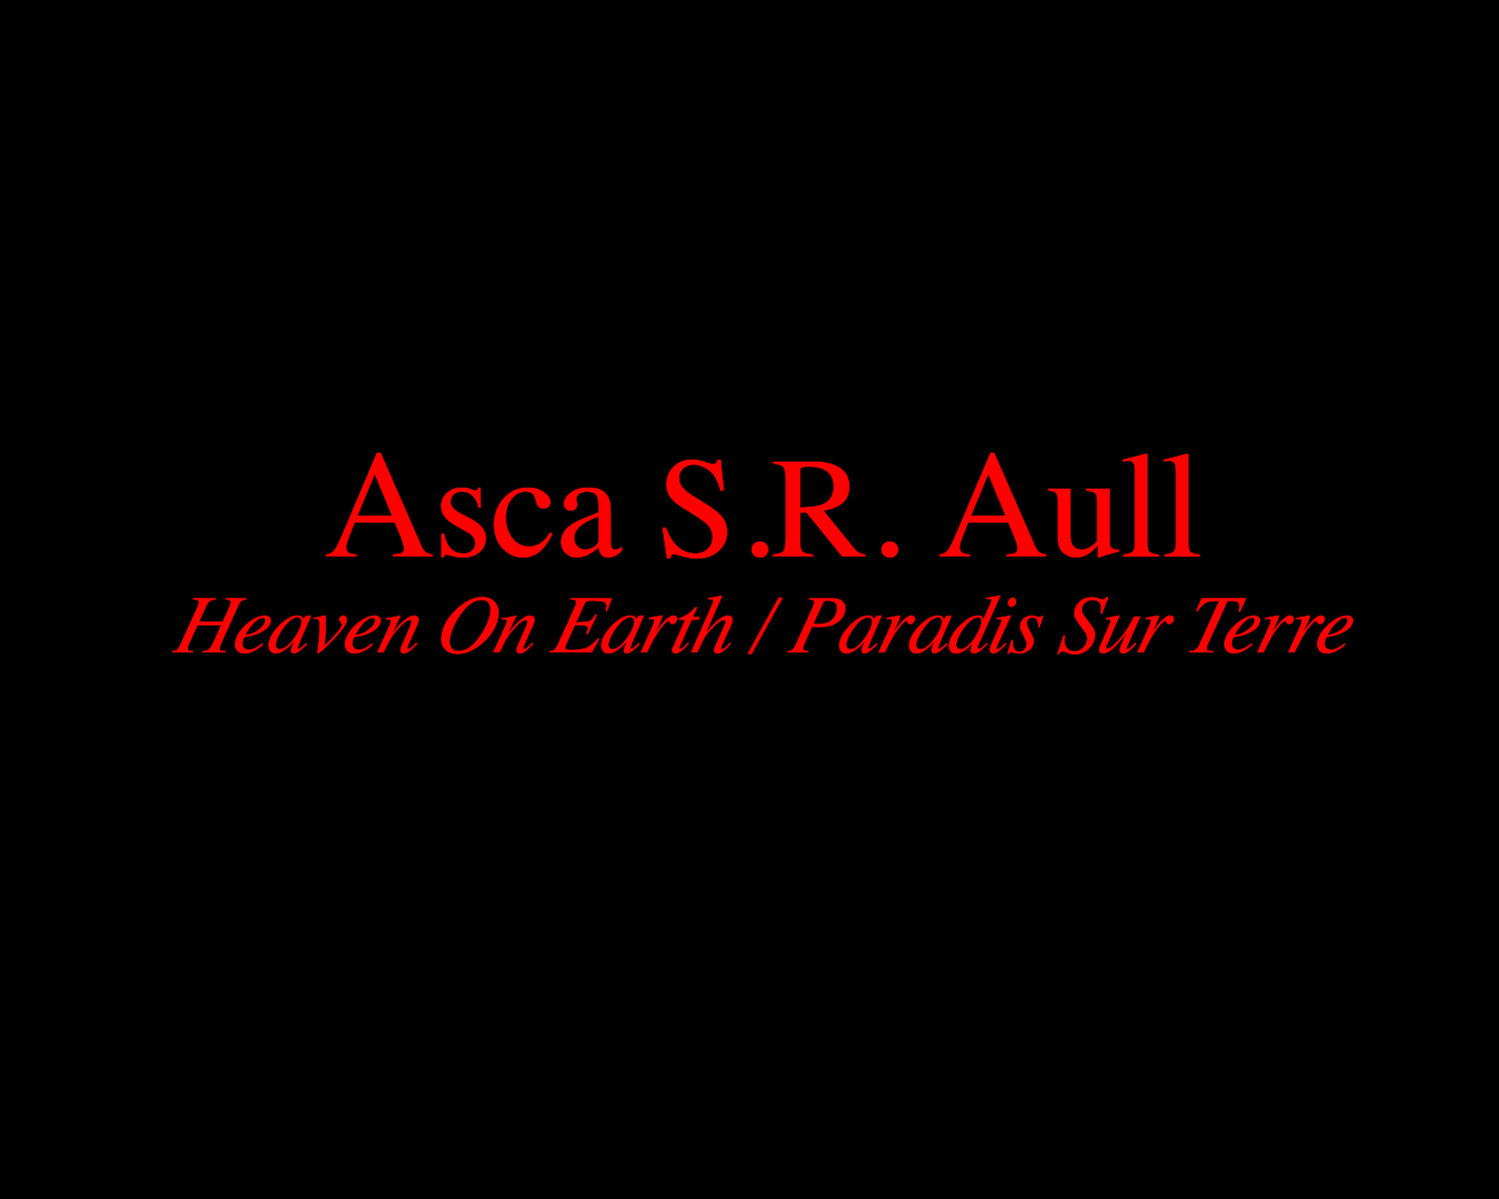 Asca S.R. Aull Heaven On Earth / Paradis Sur Terre 